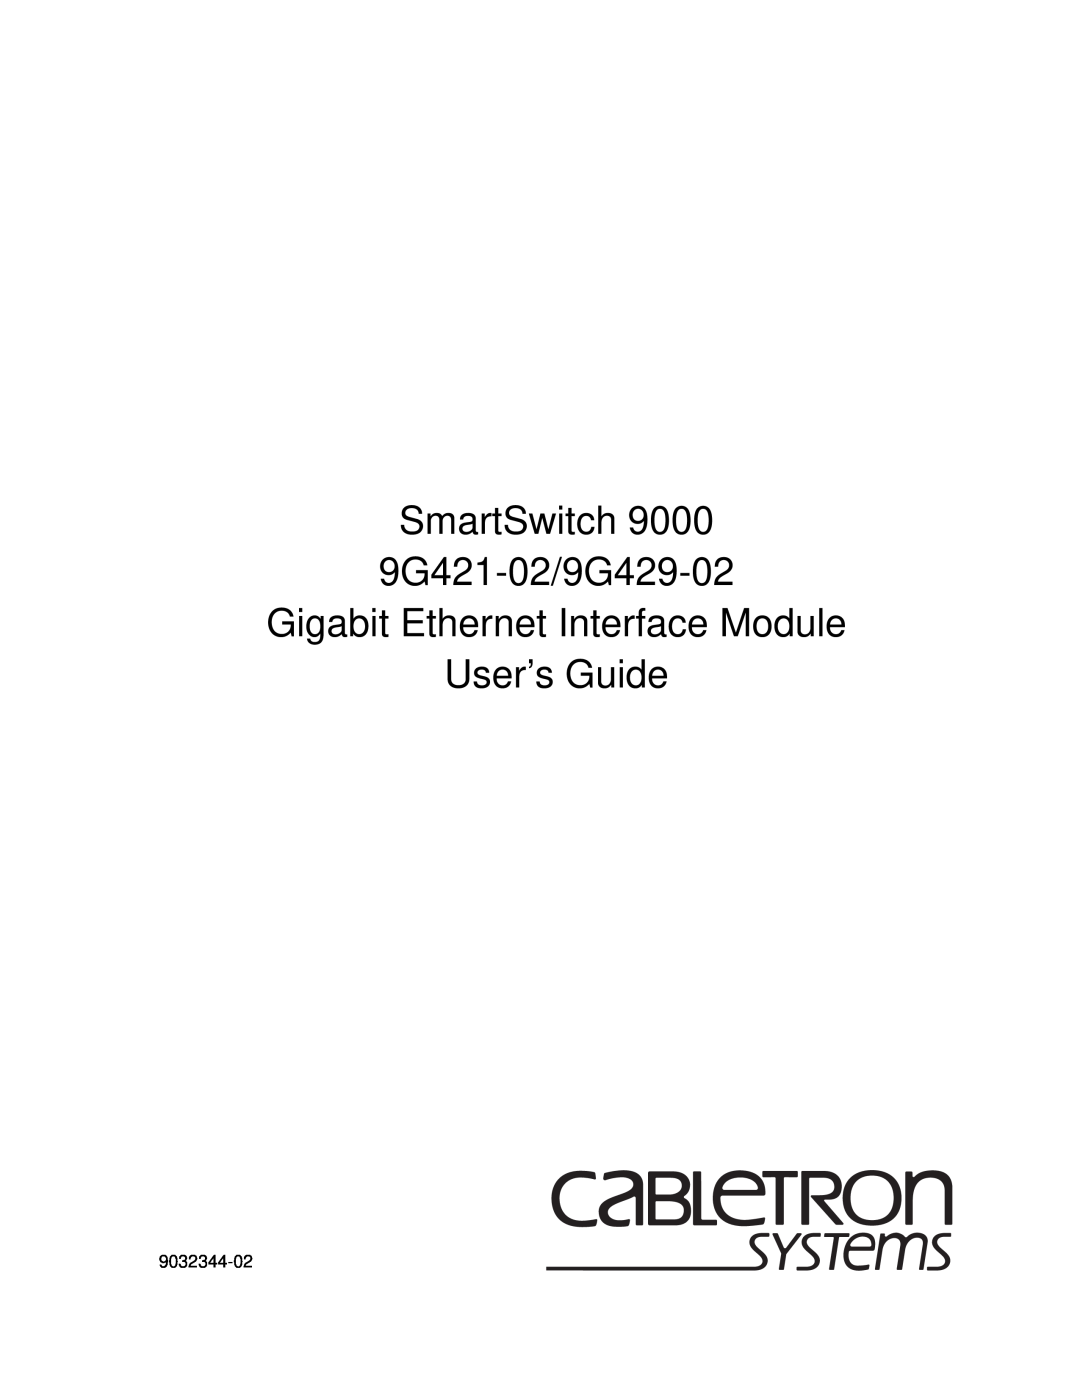 Cabletron Systems 9000 manual SmartSwitch 9G421-02/9G429-02 Gigabit Ethernet Interface Module, User’s Guide, 9032344-02 